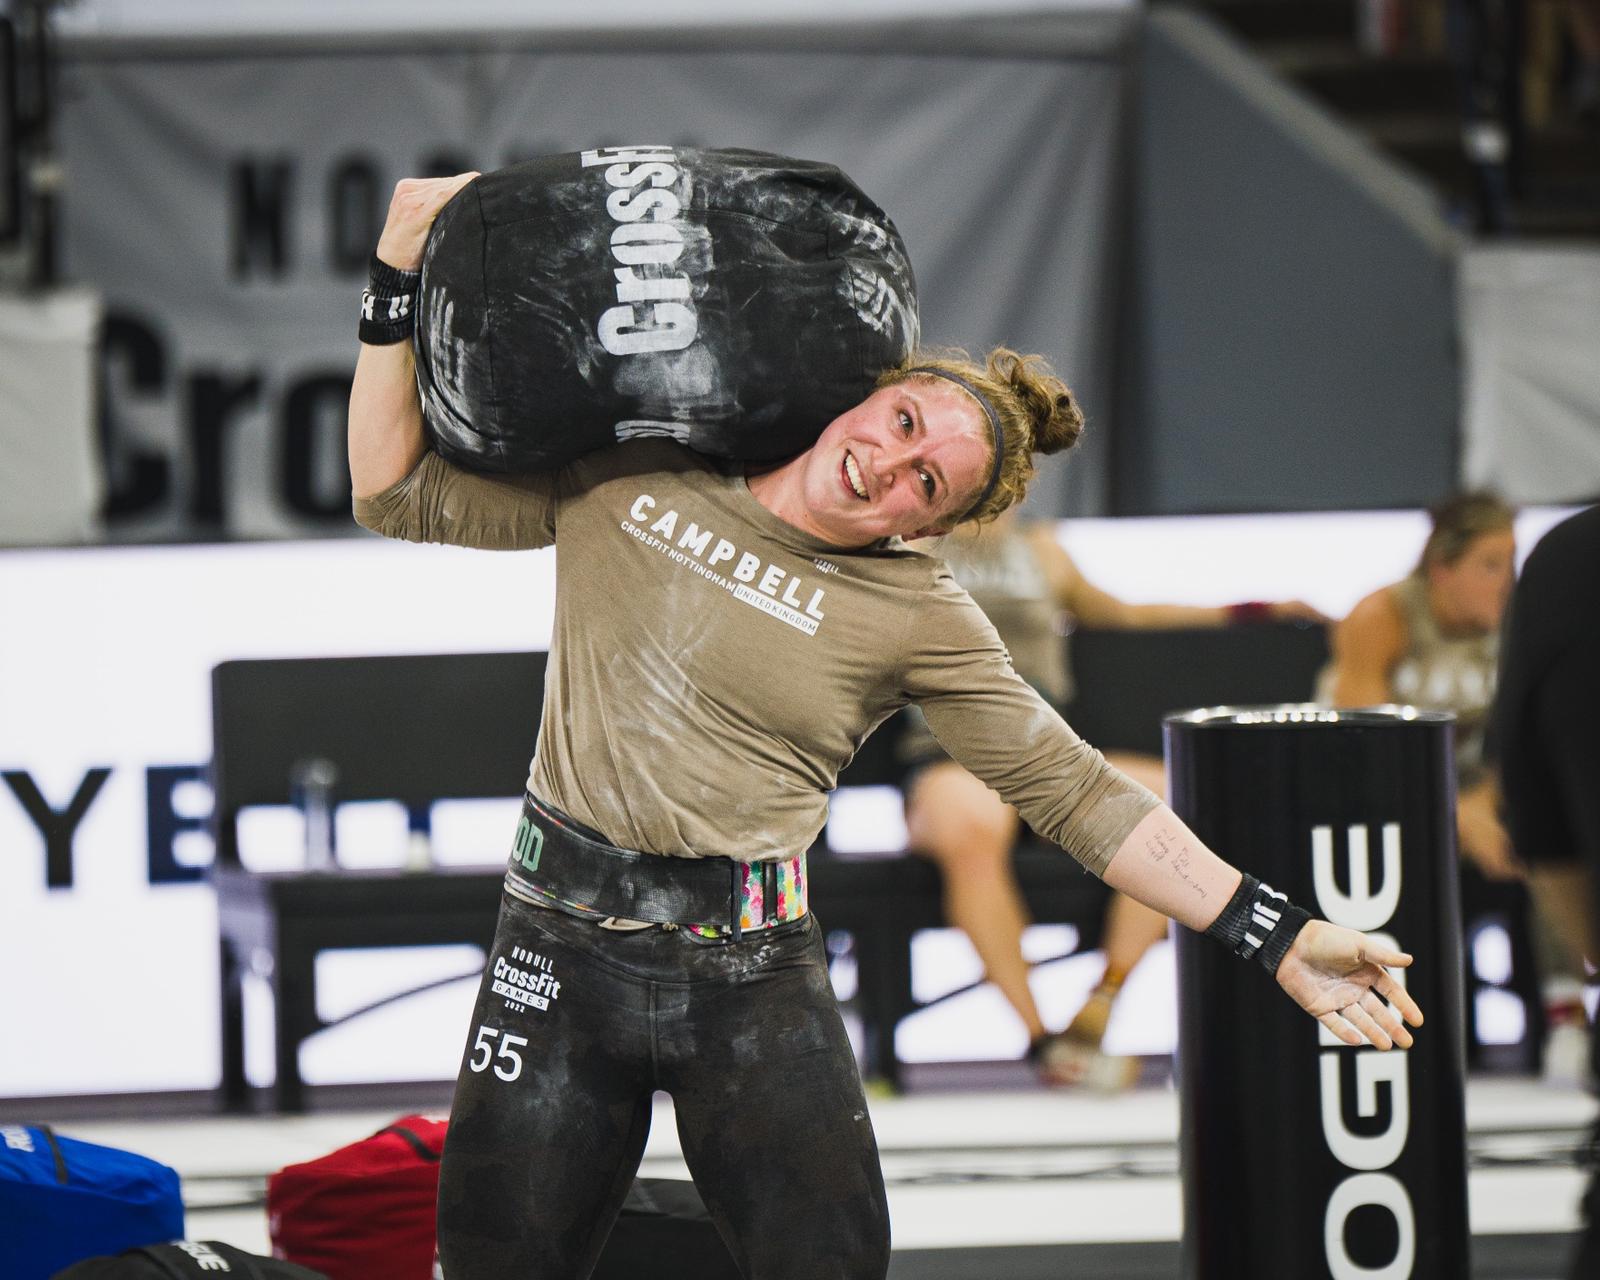 Lucy Campbell with sandbag on her shoulder during CrossFit competition